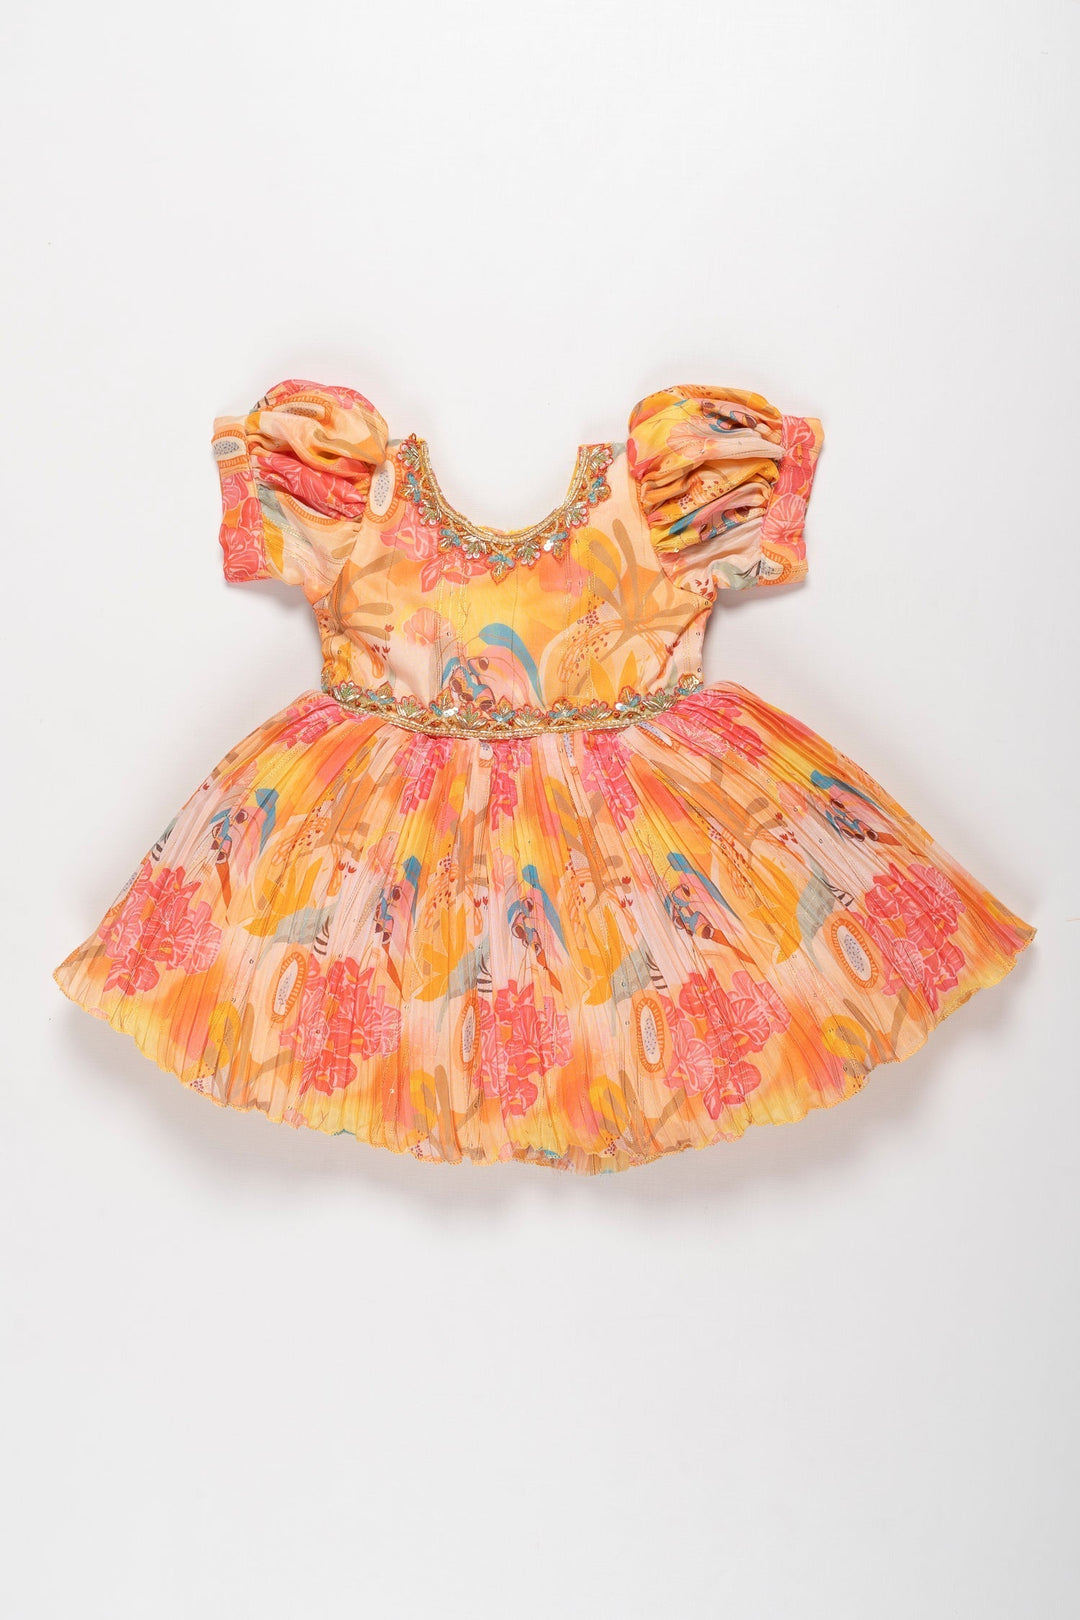 The Nesavu Silk Party Frock Sunset Hues Pleated Party Frock with Embellished Neckline for Girls Nesavu 16 (1Y) / Orange / Chinnon SF756A-16 Shop Vibrant Pleated Girls' Party Frock | Twirl-Ready & Sparkling | The Nesavu